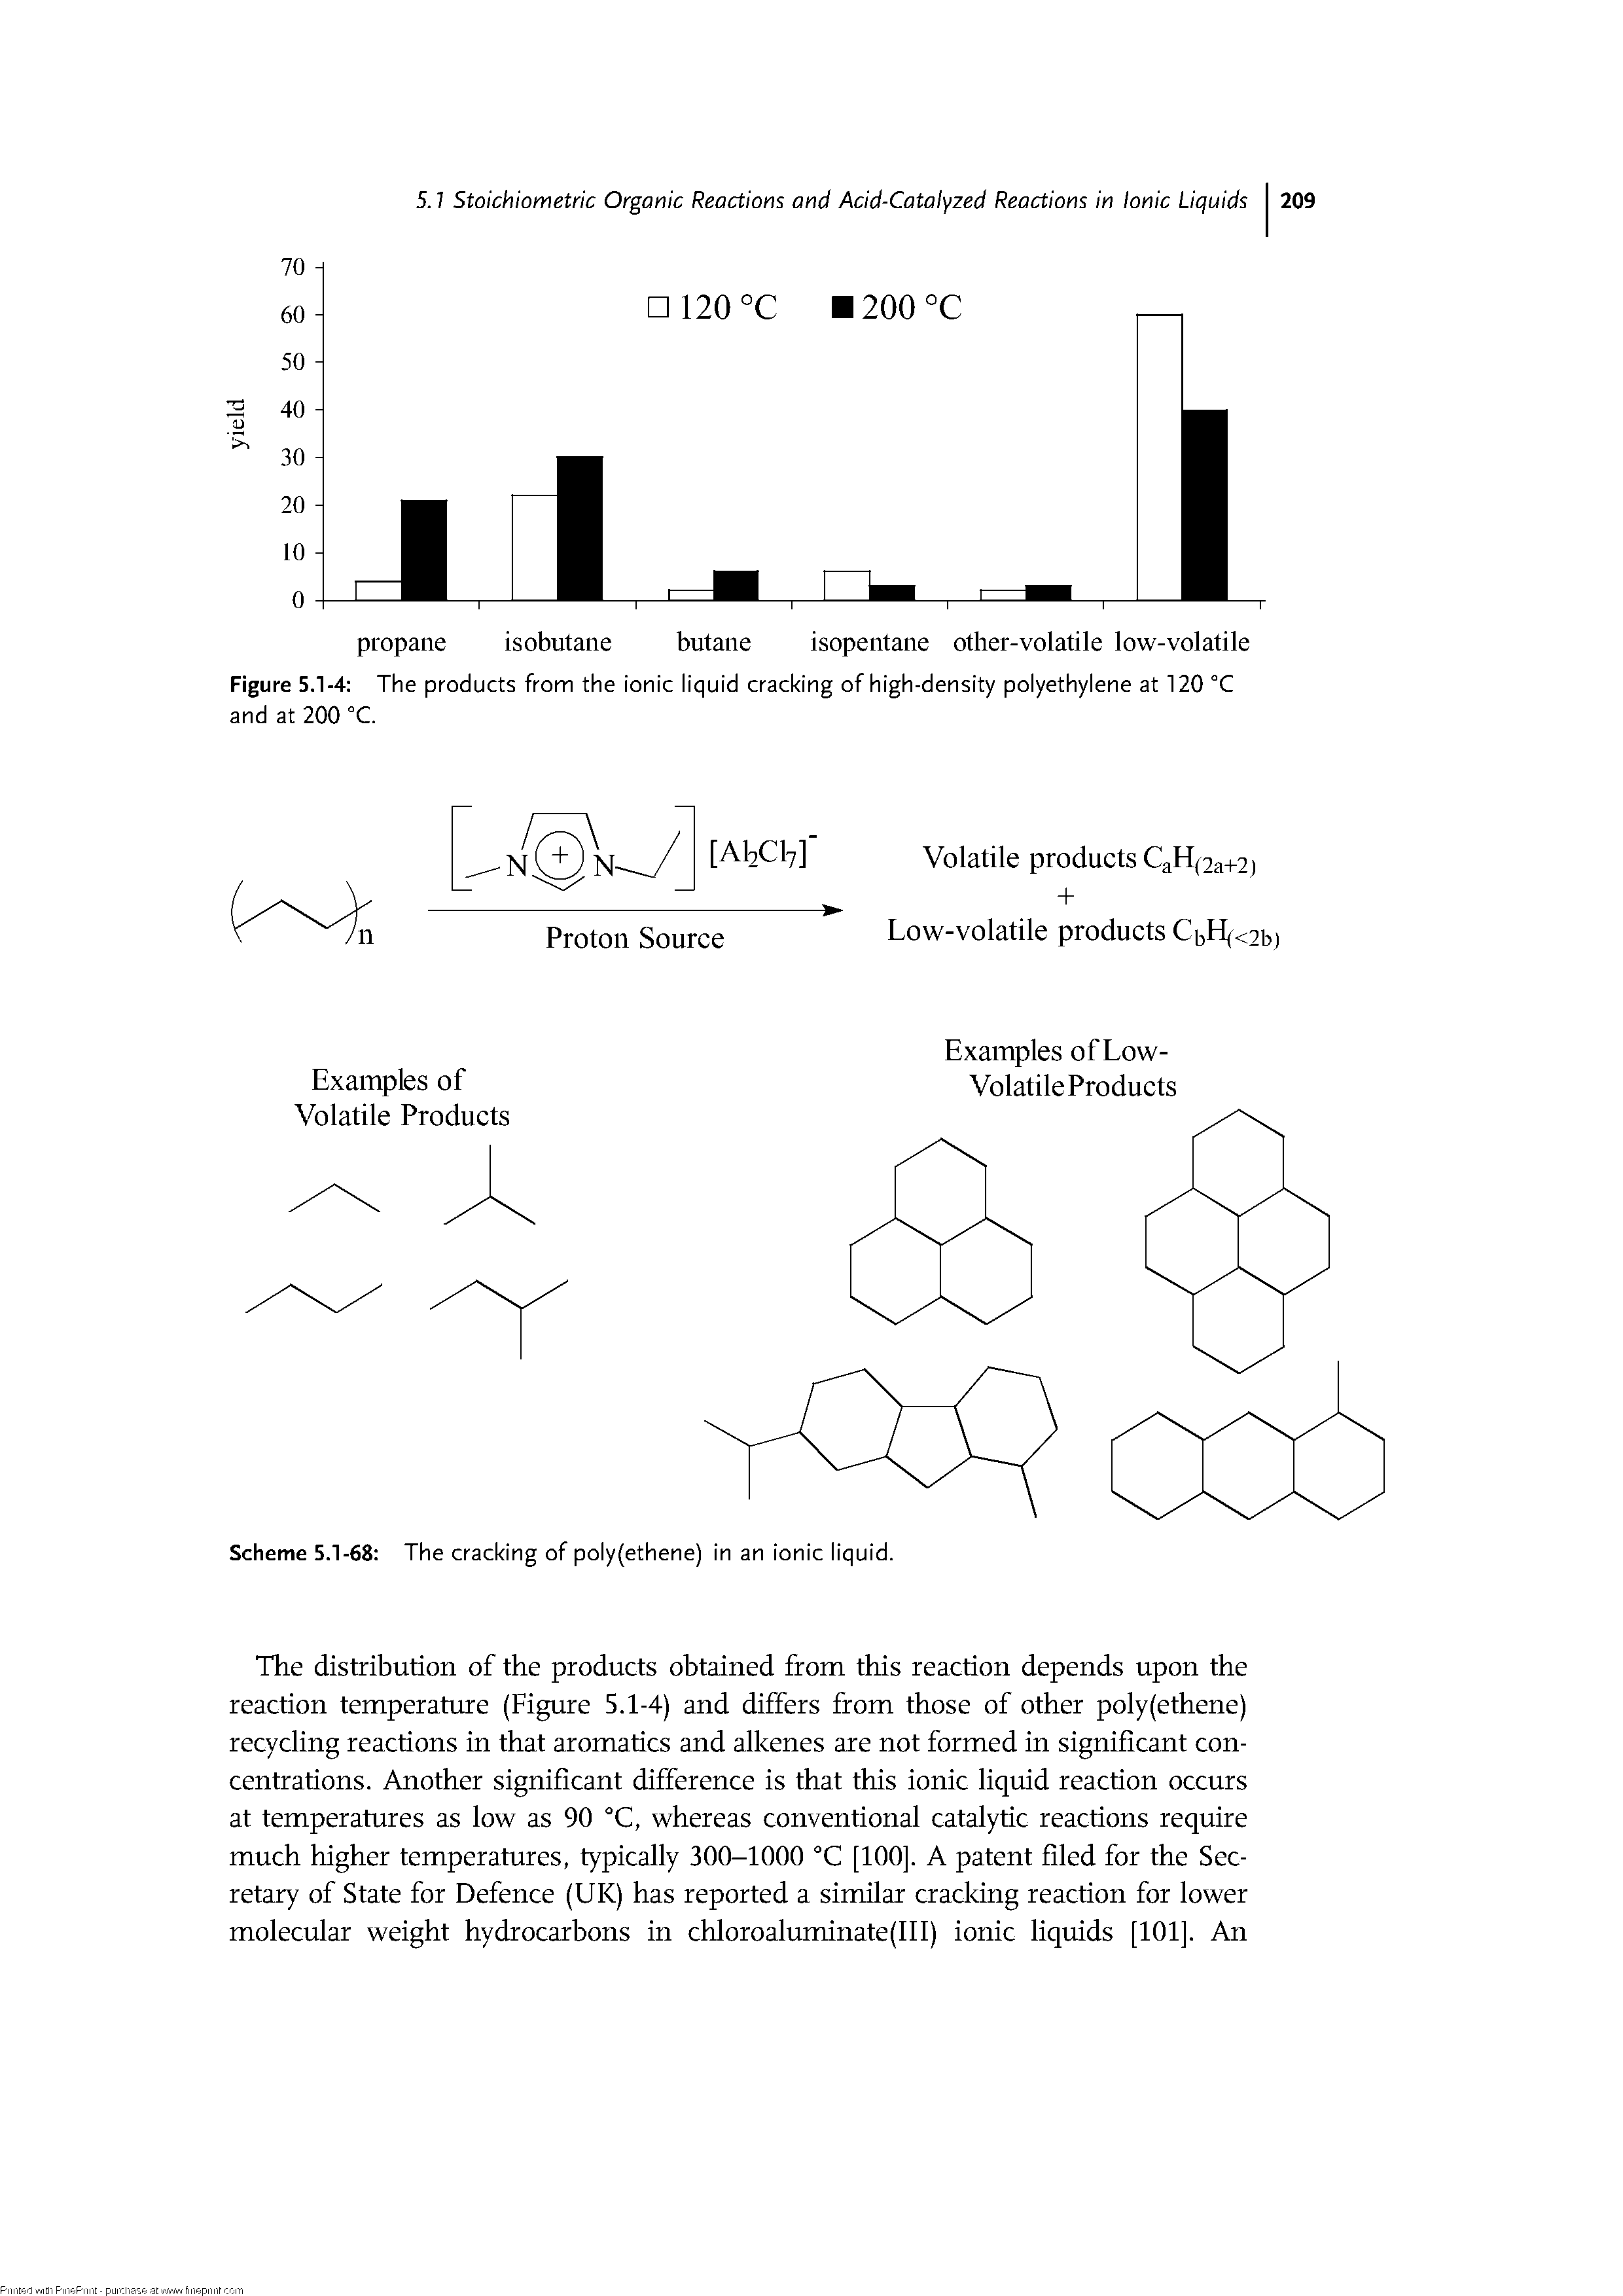 Figure 5.1-4 The products from the ionic liquid cracking of high-density polyethylene at 120 °C...